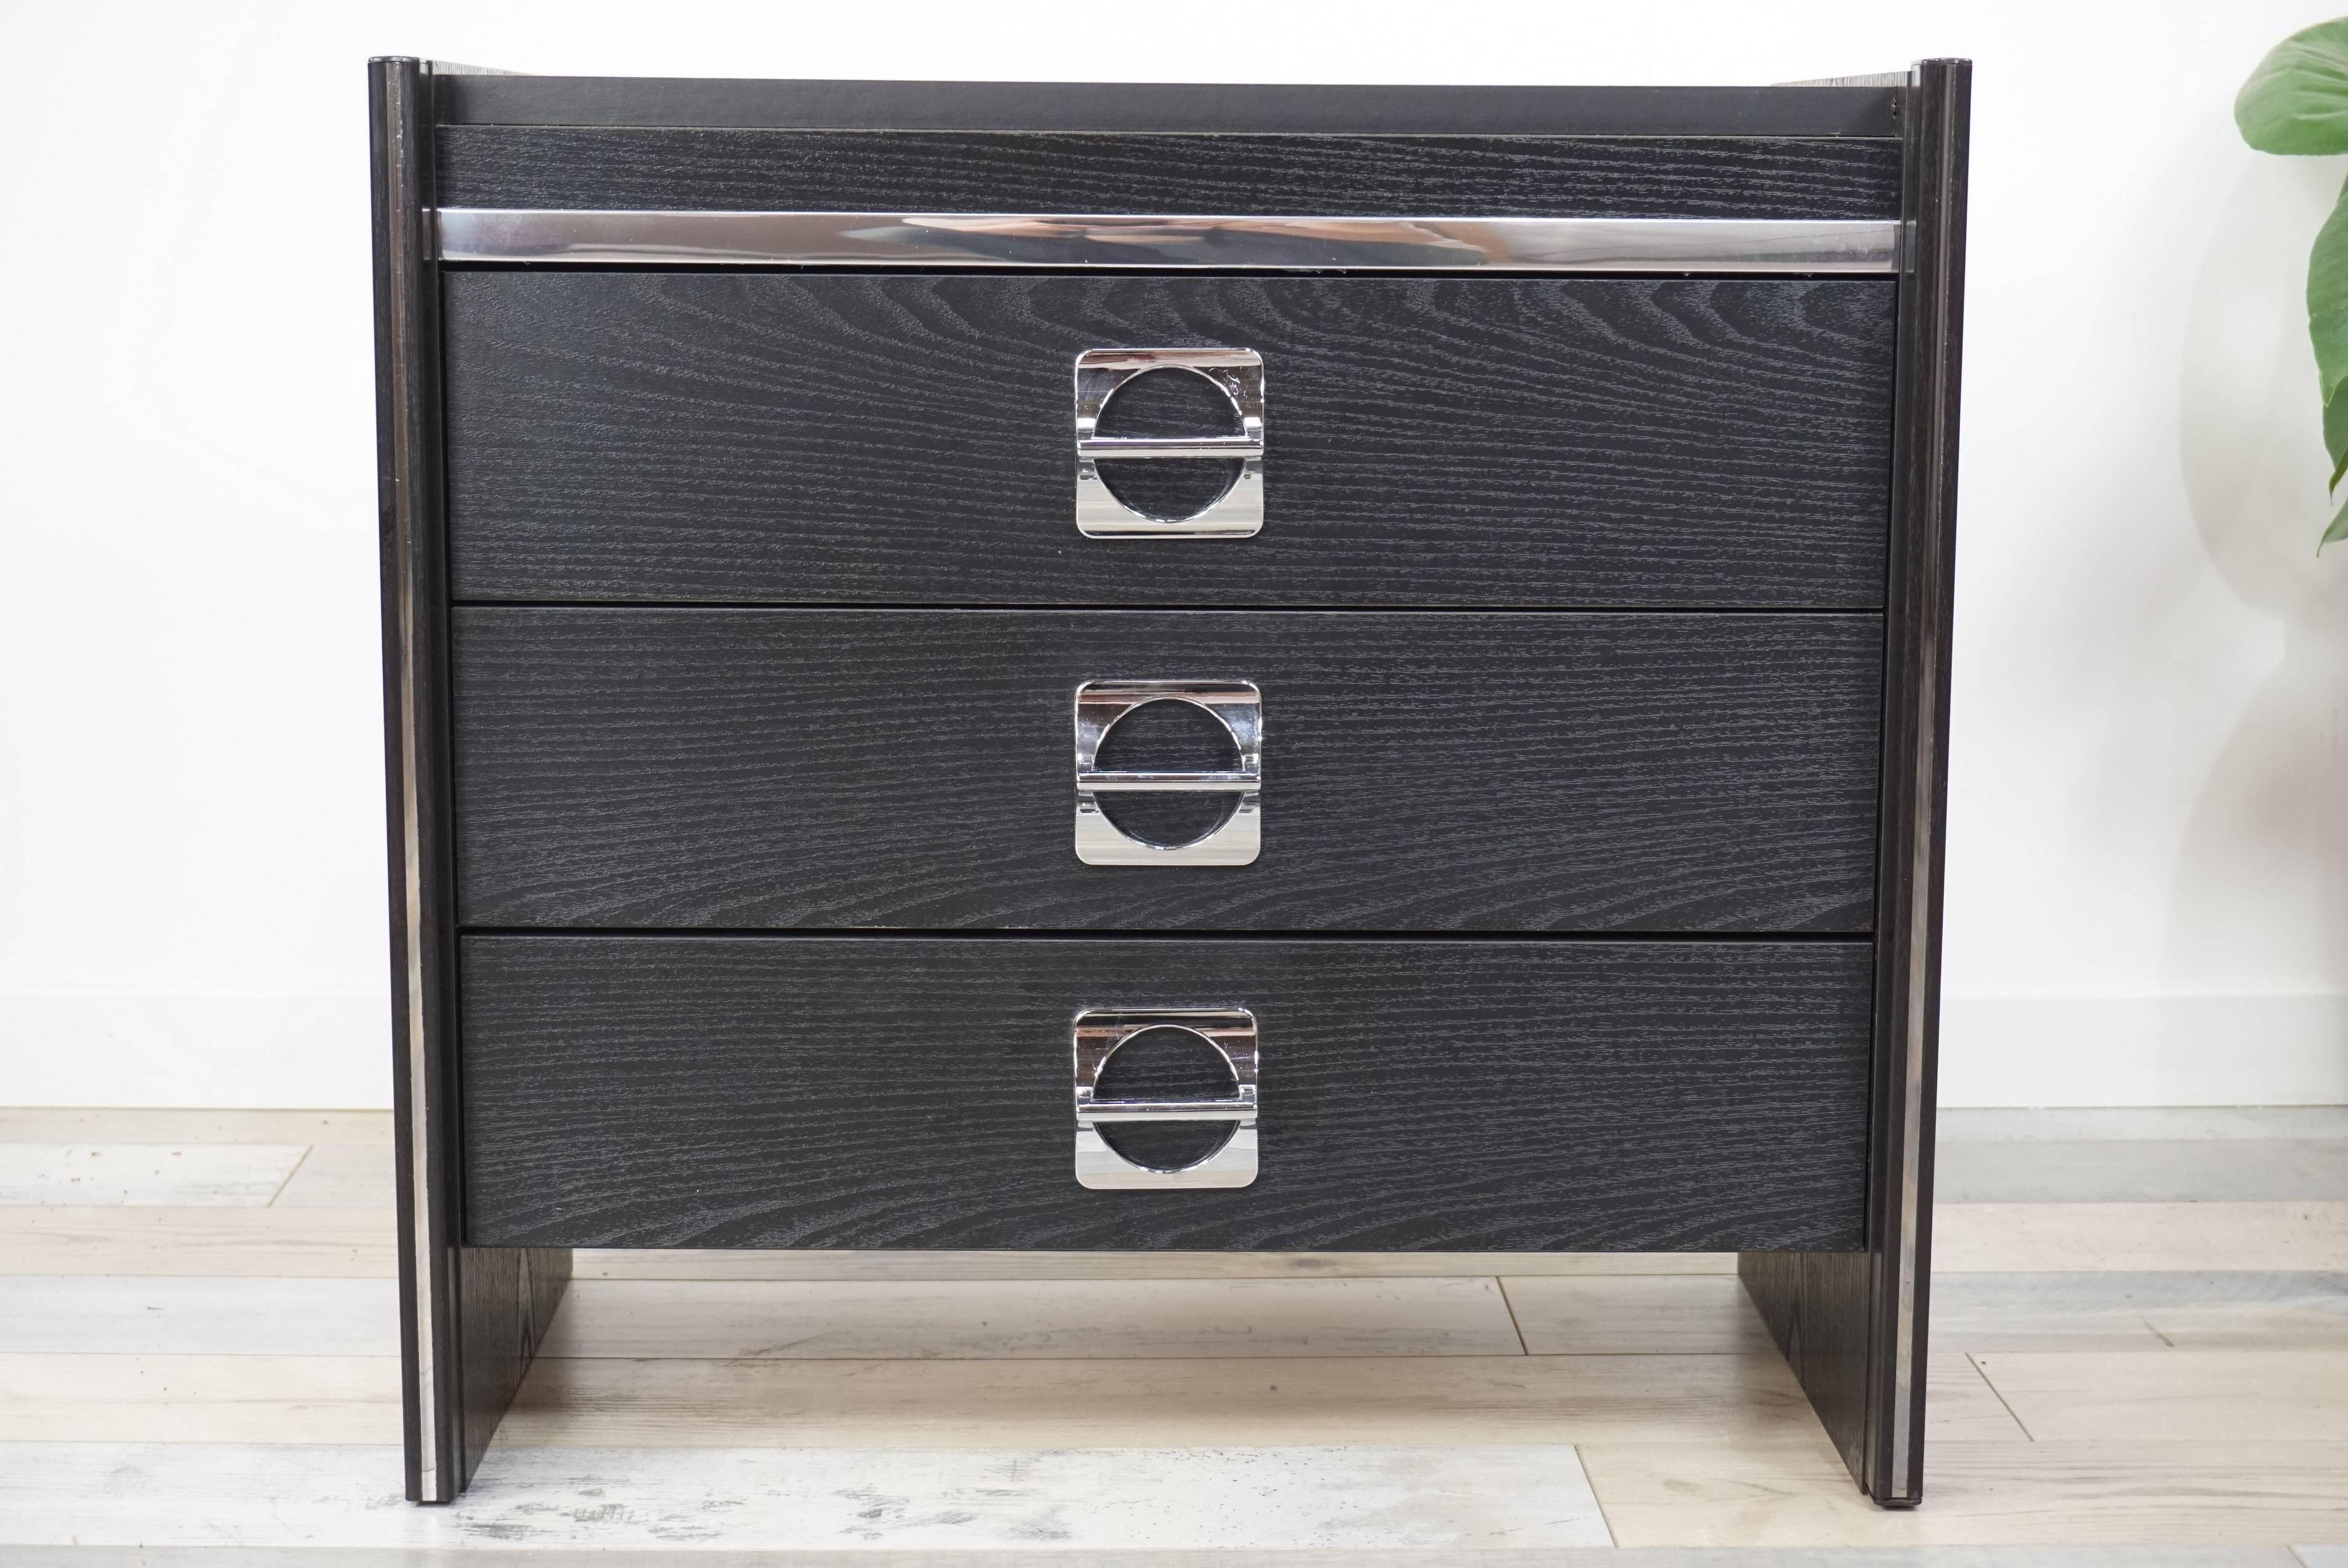 Adorable dresser three drawers black and chrome, cute by these dimensions, it will also be perfect as a bedside table.